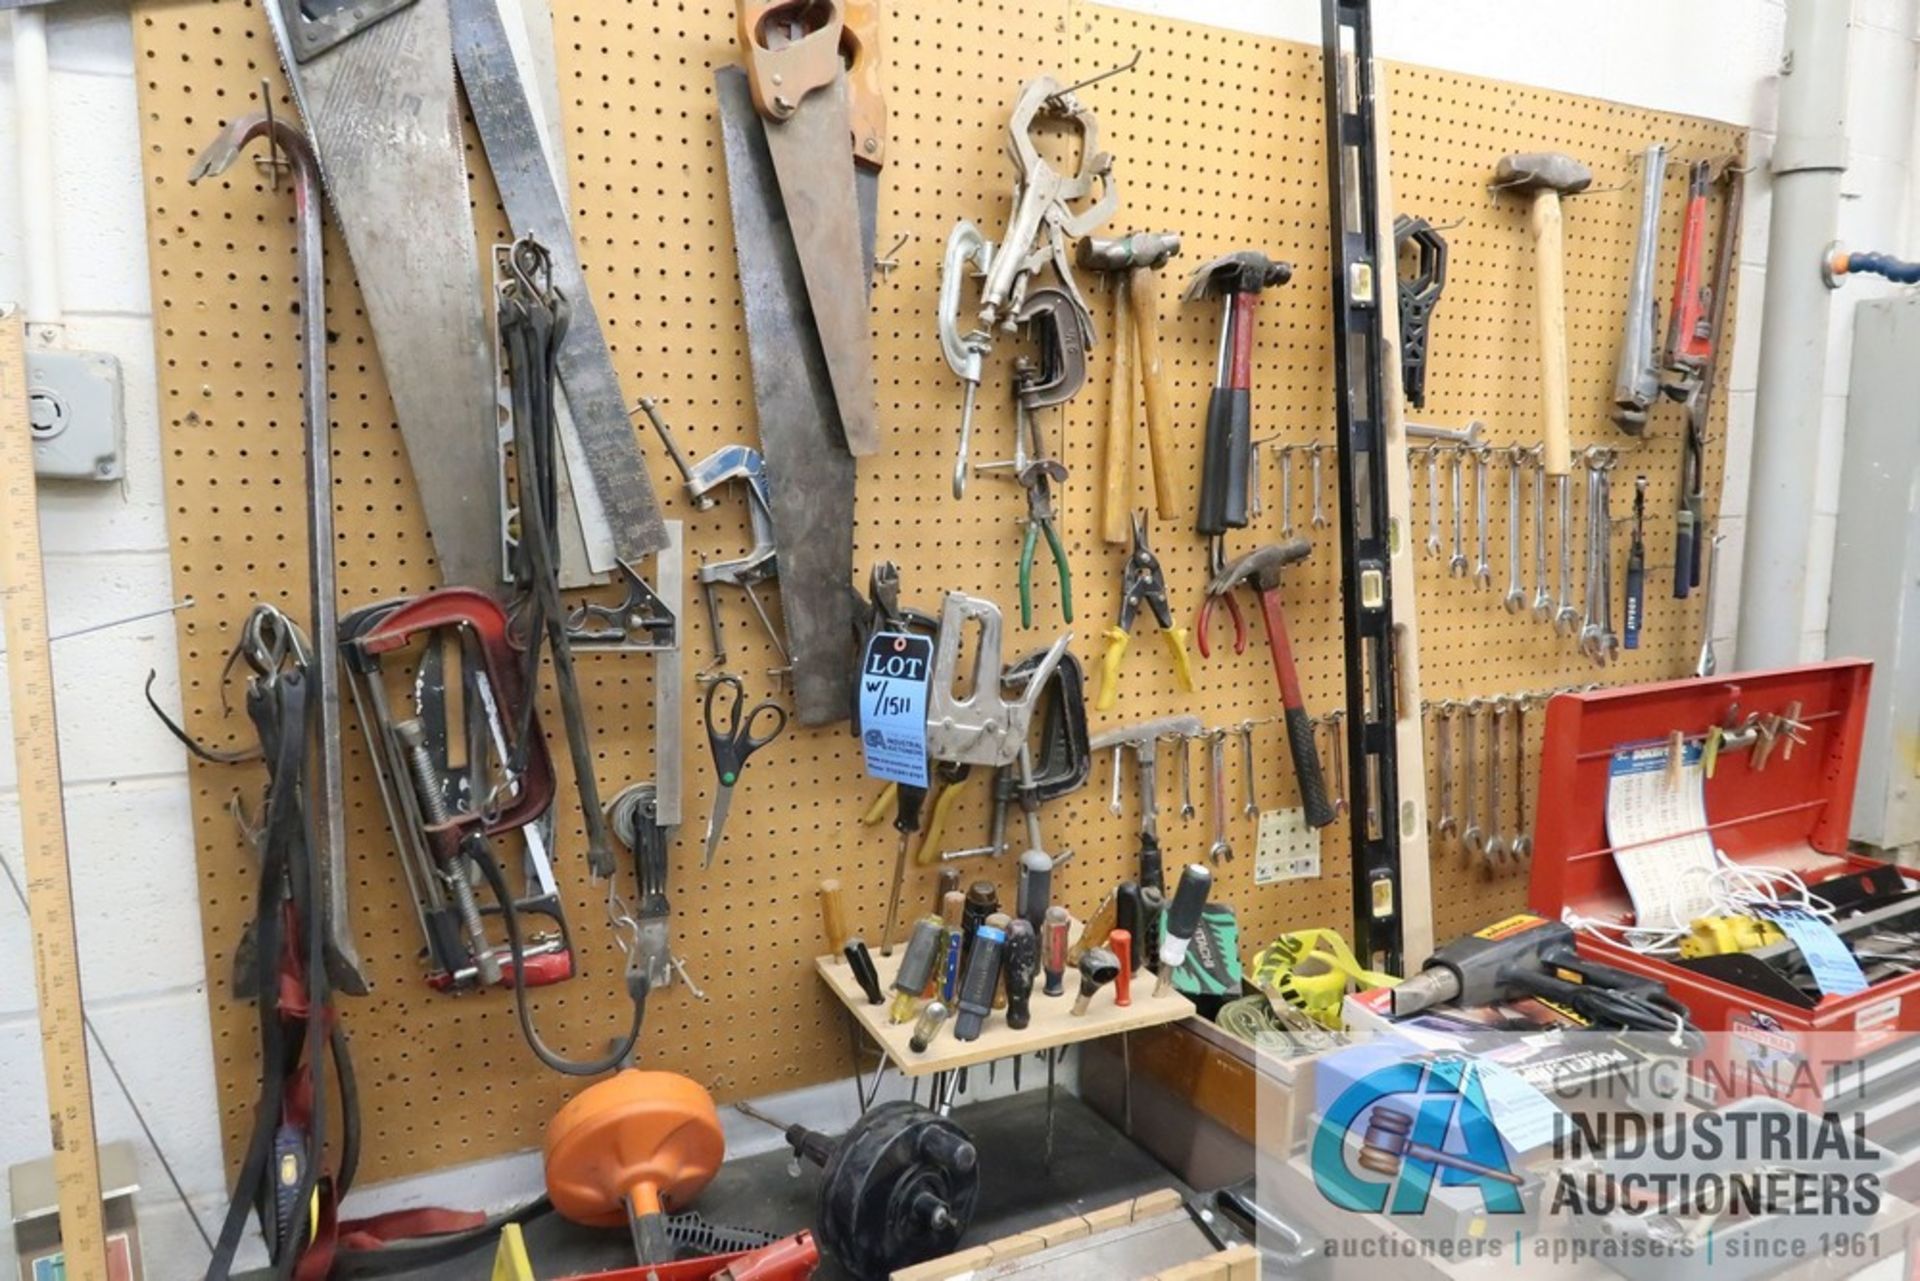 (LOT) MISCELLANEOUS HAND TOOLS, TOOL BOXES AND BENCHES - Image 2 of 10